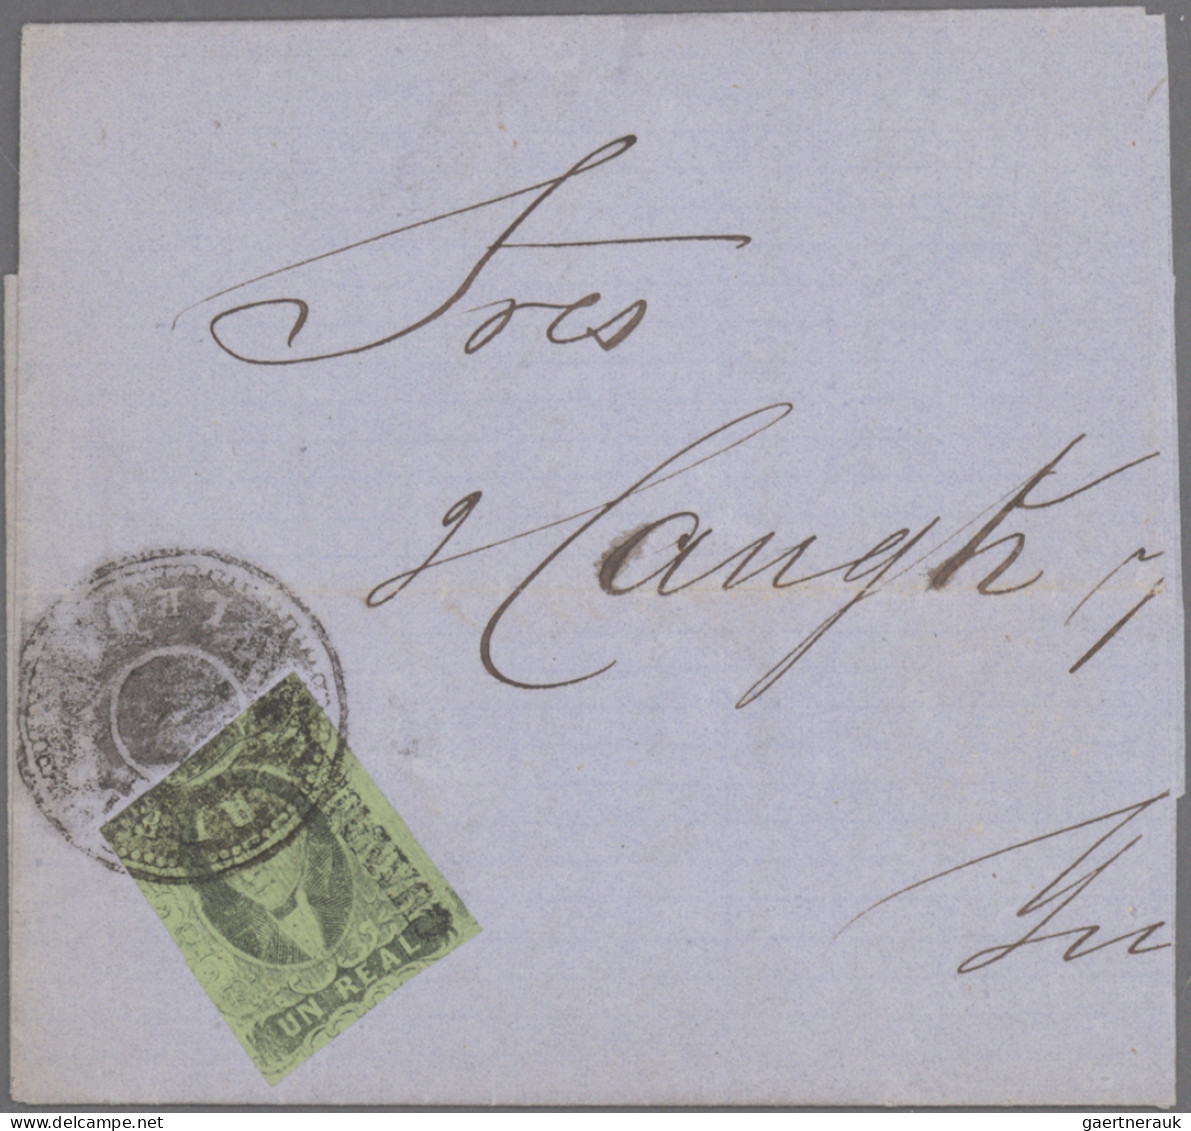 Mexico: 1858/1872, HIDALGO, collection of 26 letters (incl. one shortened letter